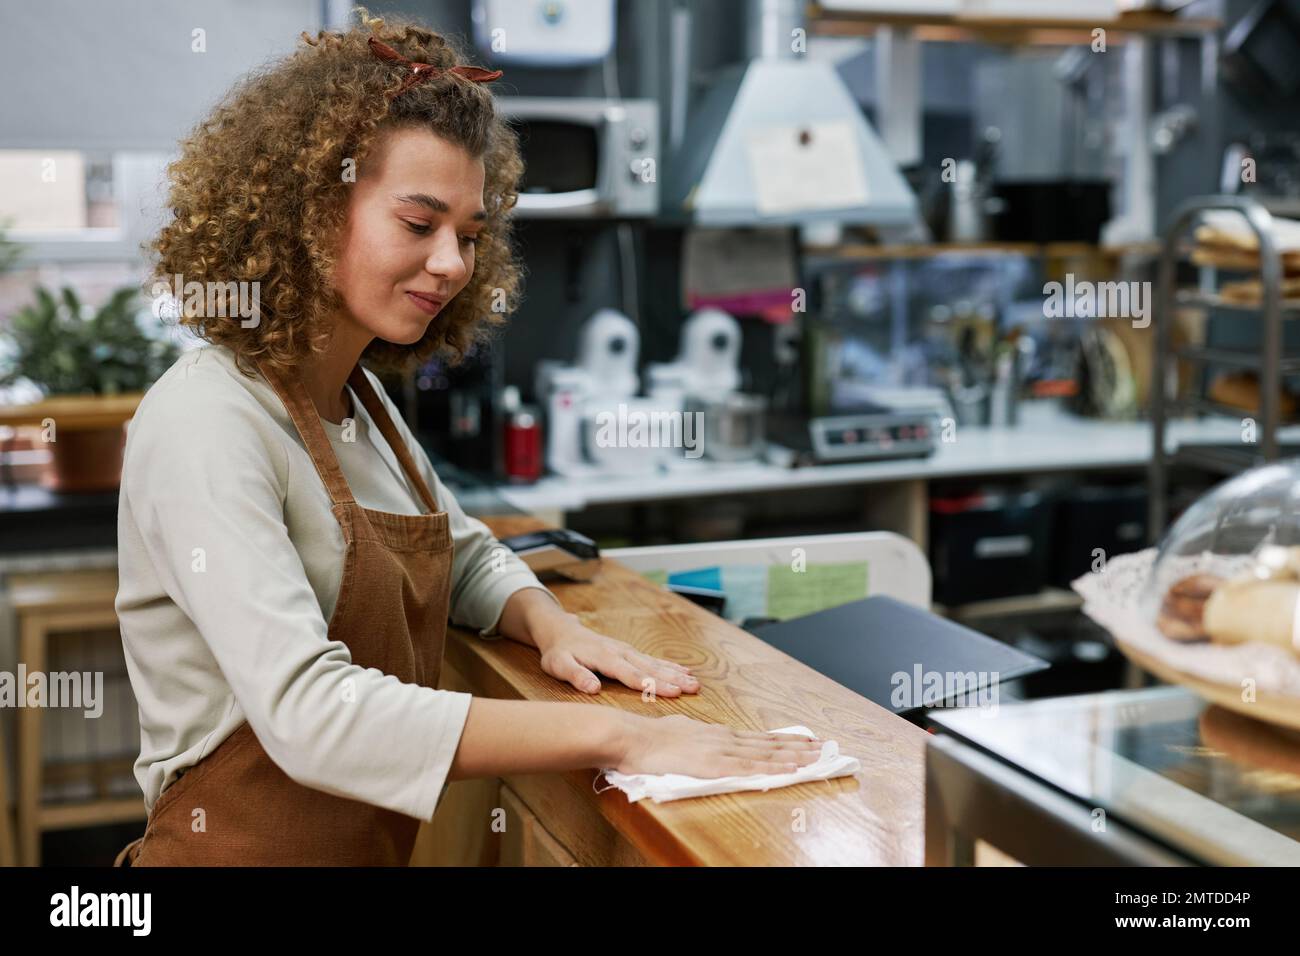 Positive bakery worker wiping counter with disinfecting spray Stock Photo